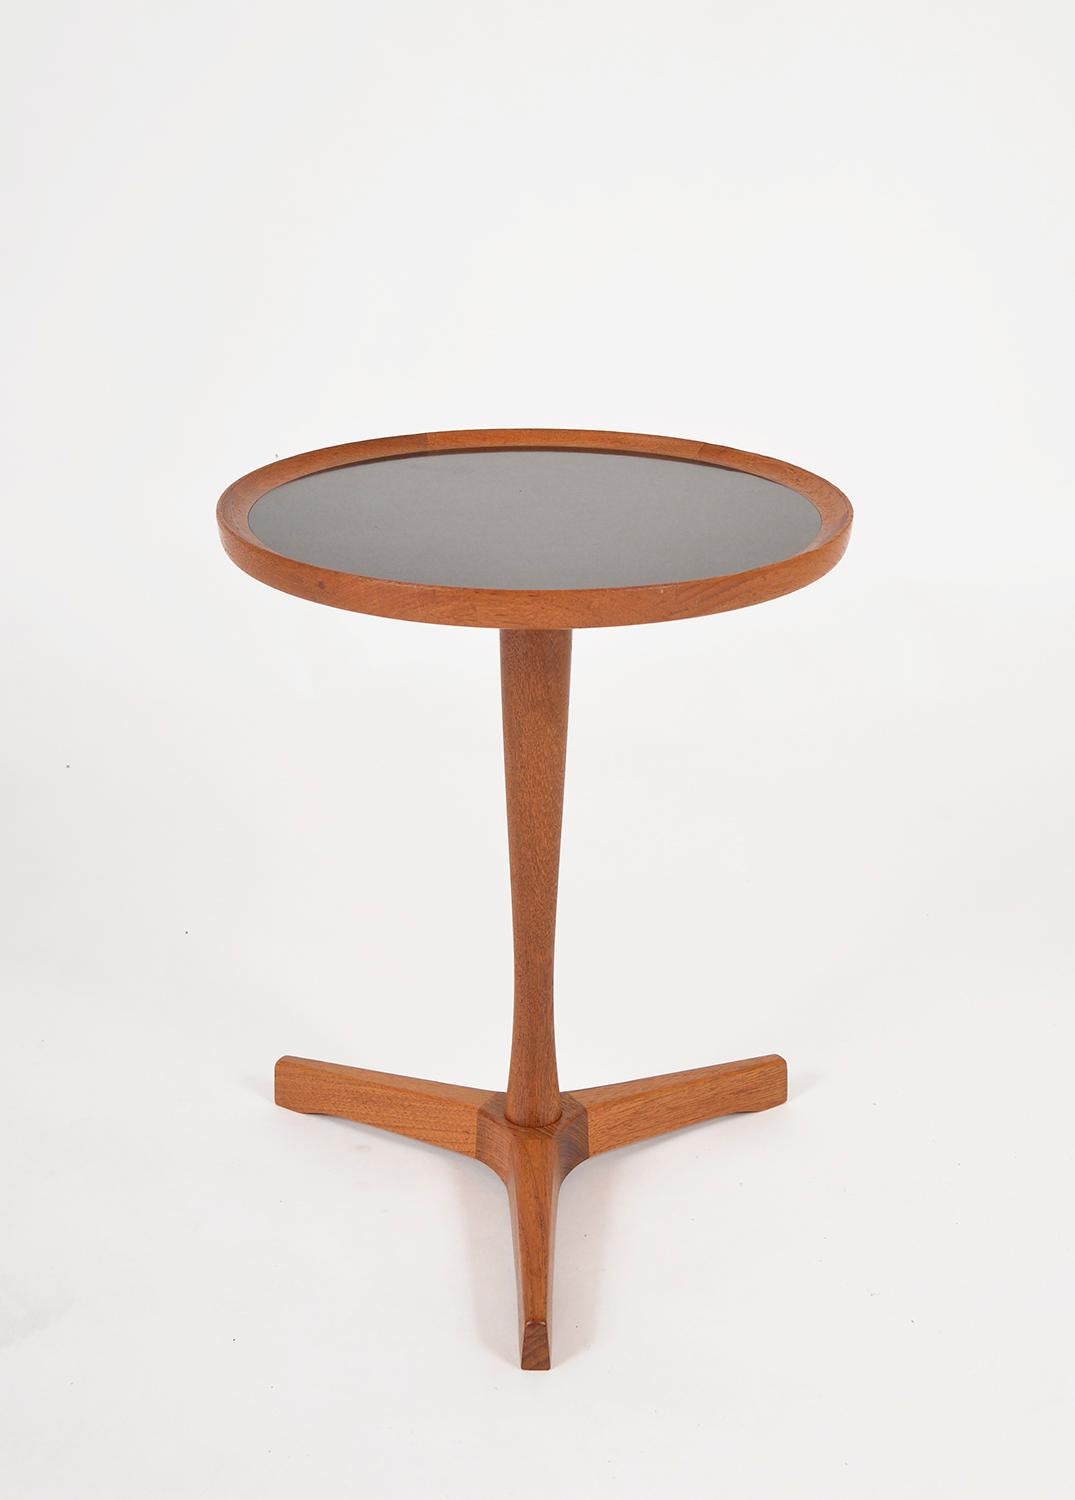 This perfectly proportioned Danish tripod base side table was designed by Hans C. Andersen for Artex. This is a lovely example of Danish Modern design. Its shaft and base are of solid teak, and the tabletop is inlaid with black mica laminate. The